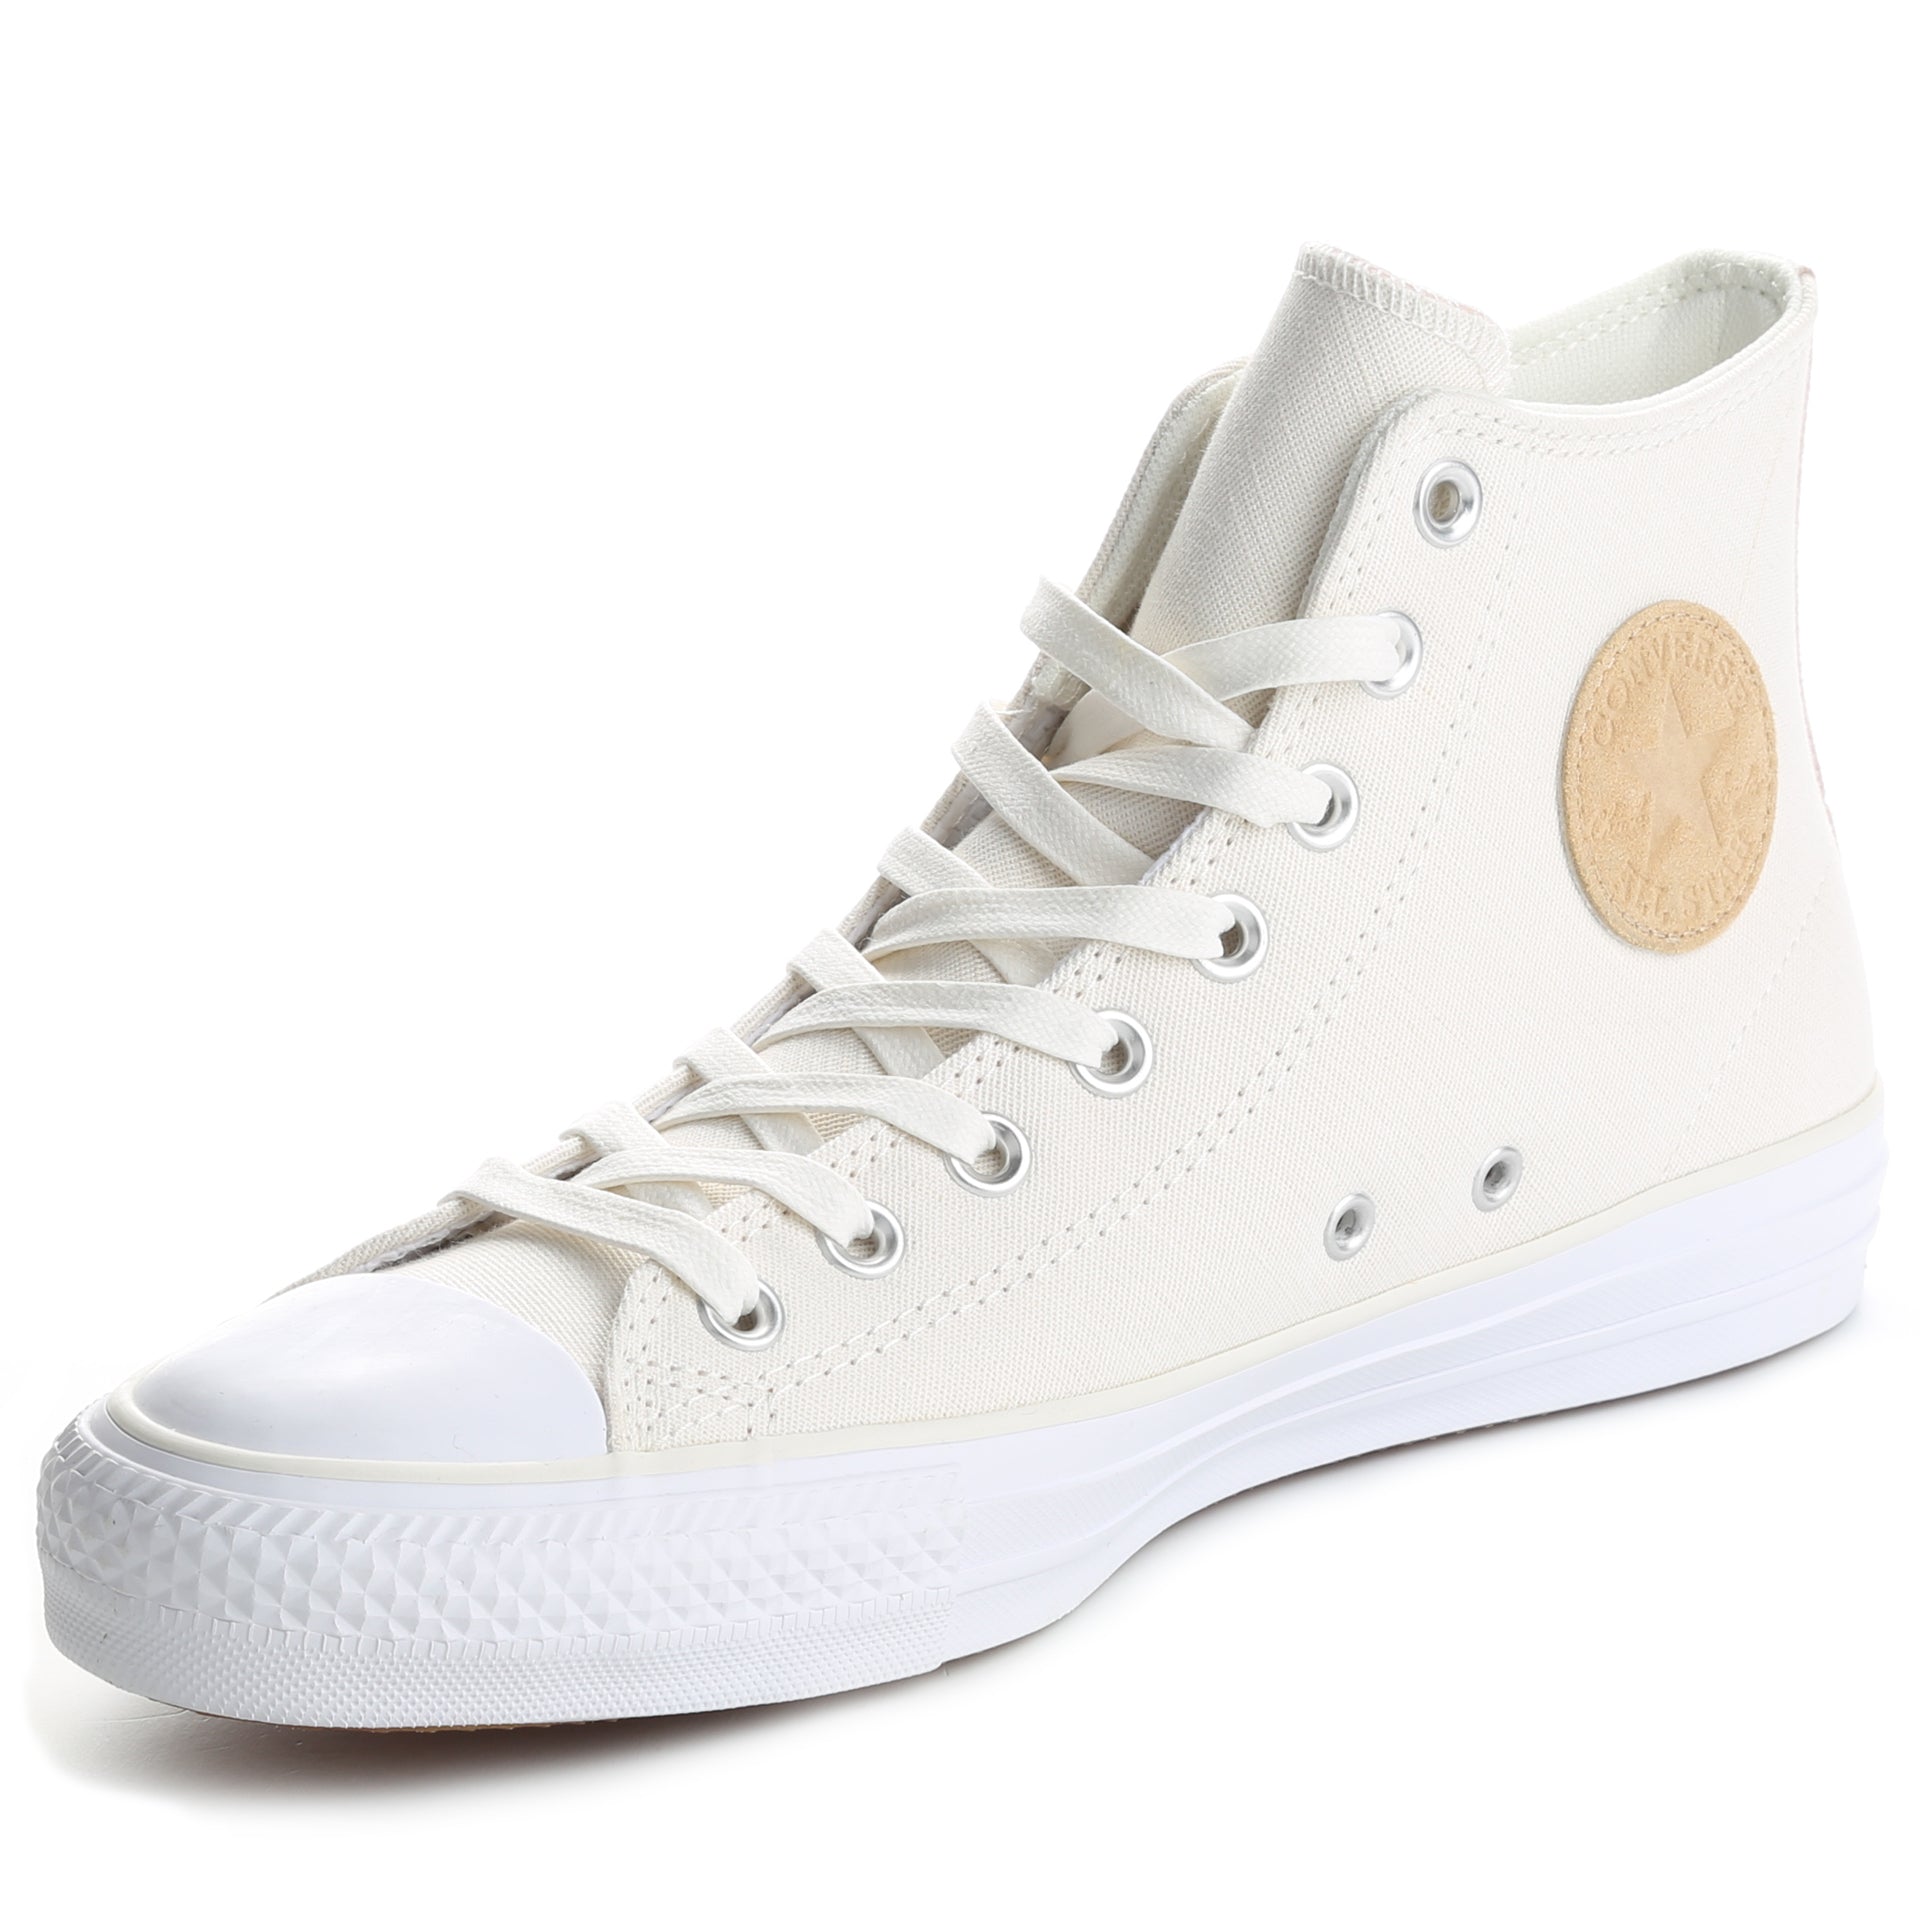 Converse CTAS Pro Suede Backed Twill High Top - Egret/Dusk Pink - New Star